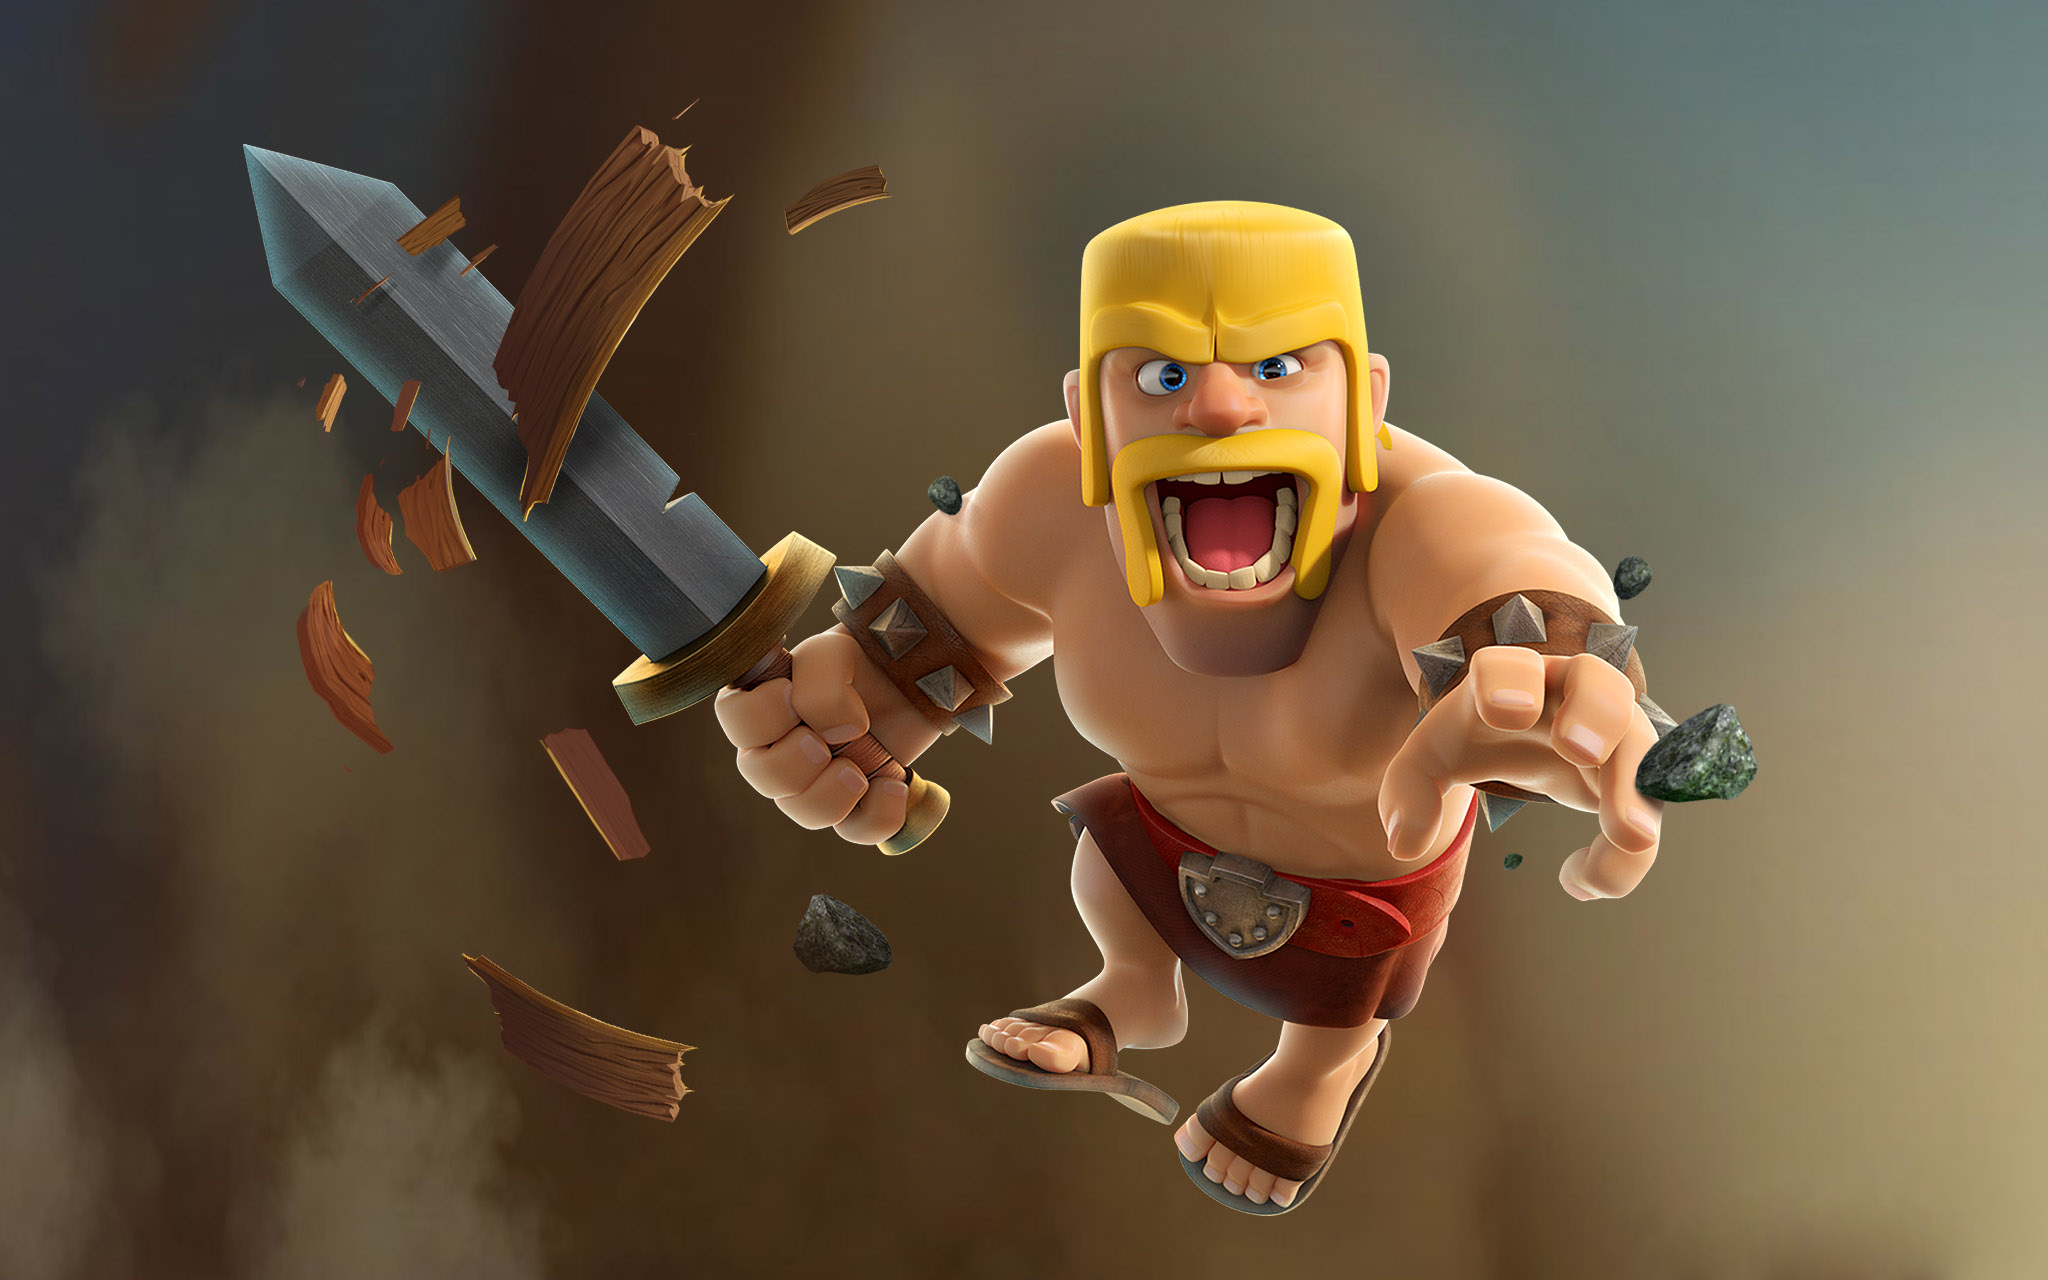 Video Game Clash of Clans HD Wallpaper Background Image.